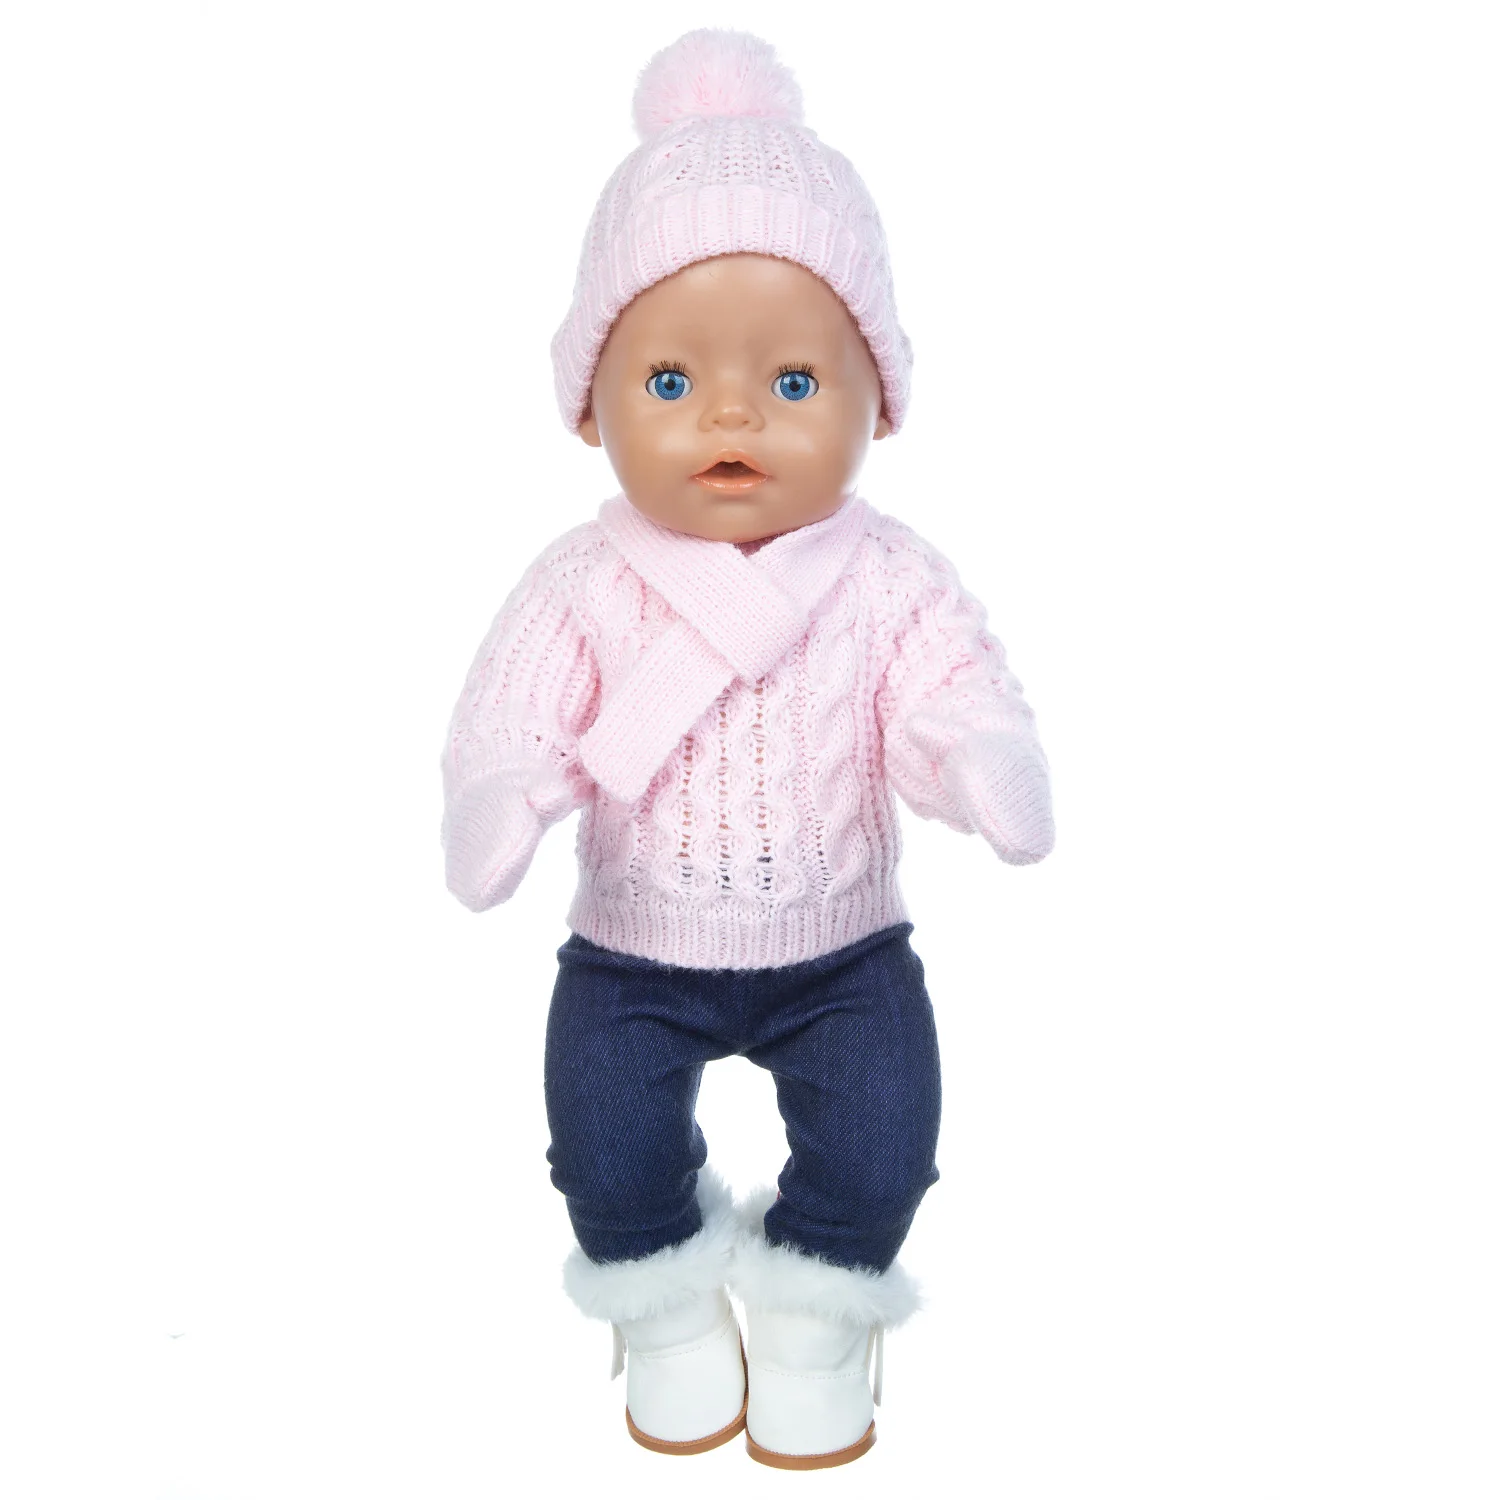 2021 New Hot Sprzedaż Fit 18 inch New Baby Born Doll Clothes Christmas Accessories S weater 4-piece Suit For Baby Birthday Gift